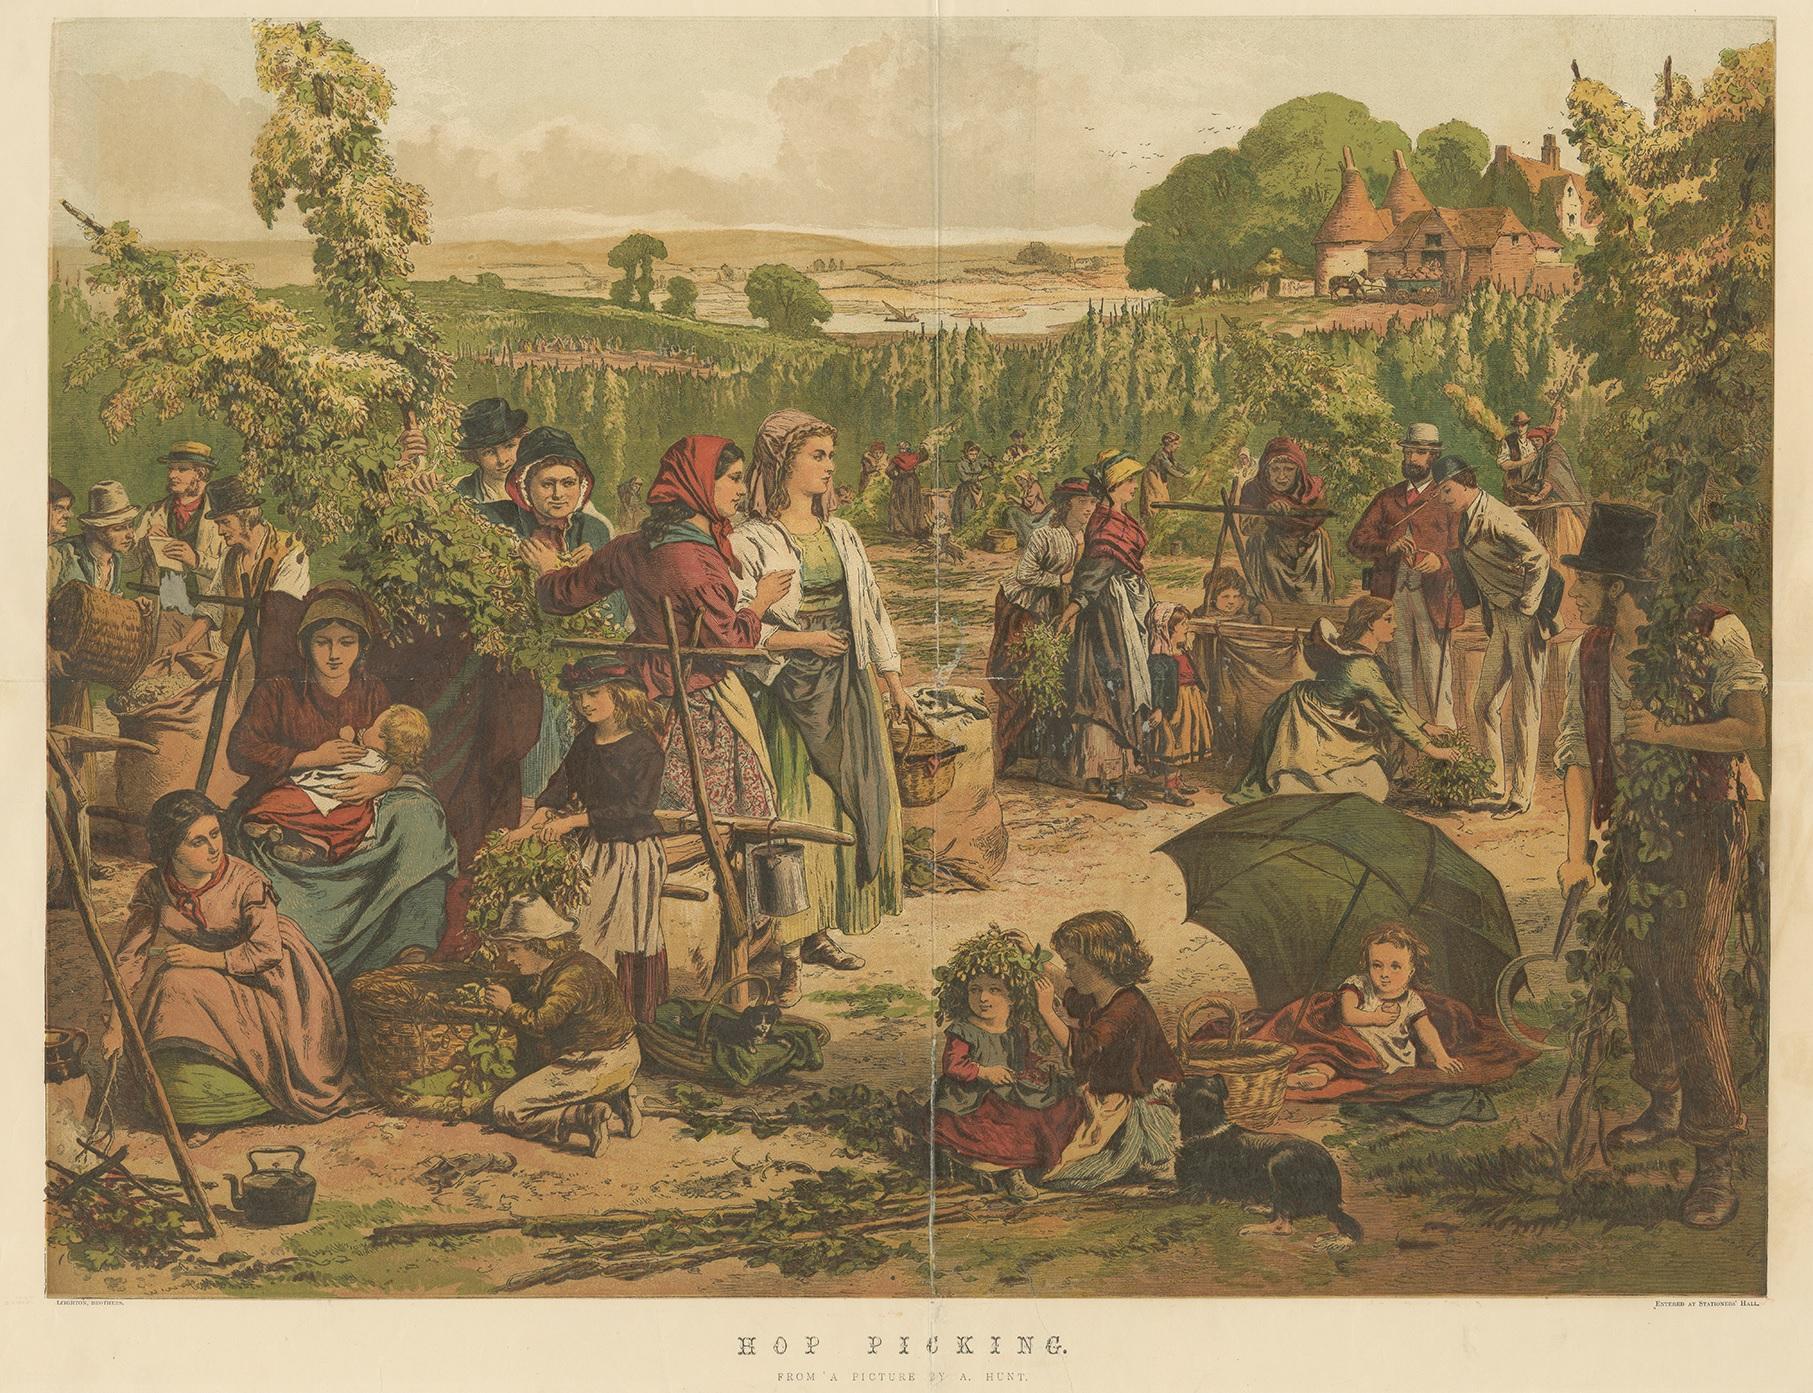 Antique print titled 'Hop Picking'. Original antique print of hop pickers at work. Men and women work in the hop fields, possibly in Kent or Surrey, England. Right, two gentlemen buy some hops. Foreground, young children of the hop-pickers. Right